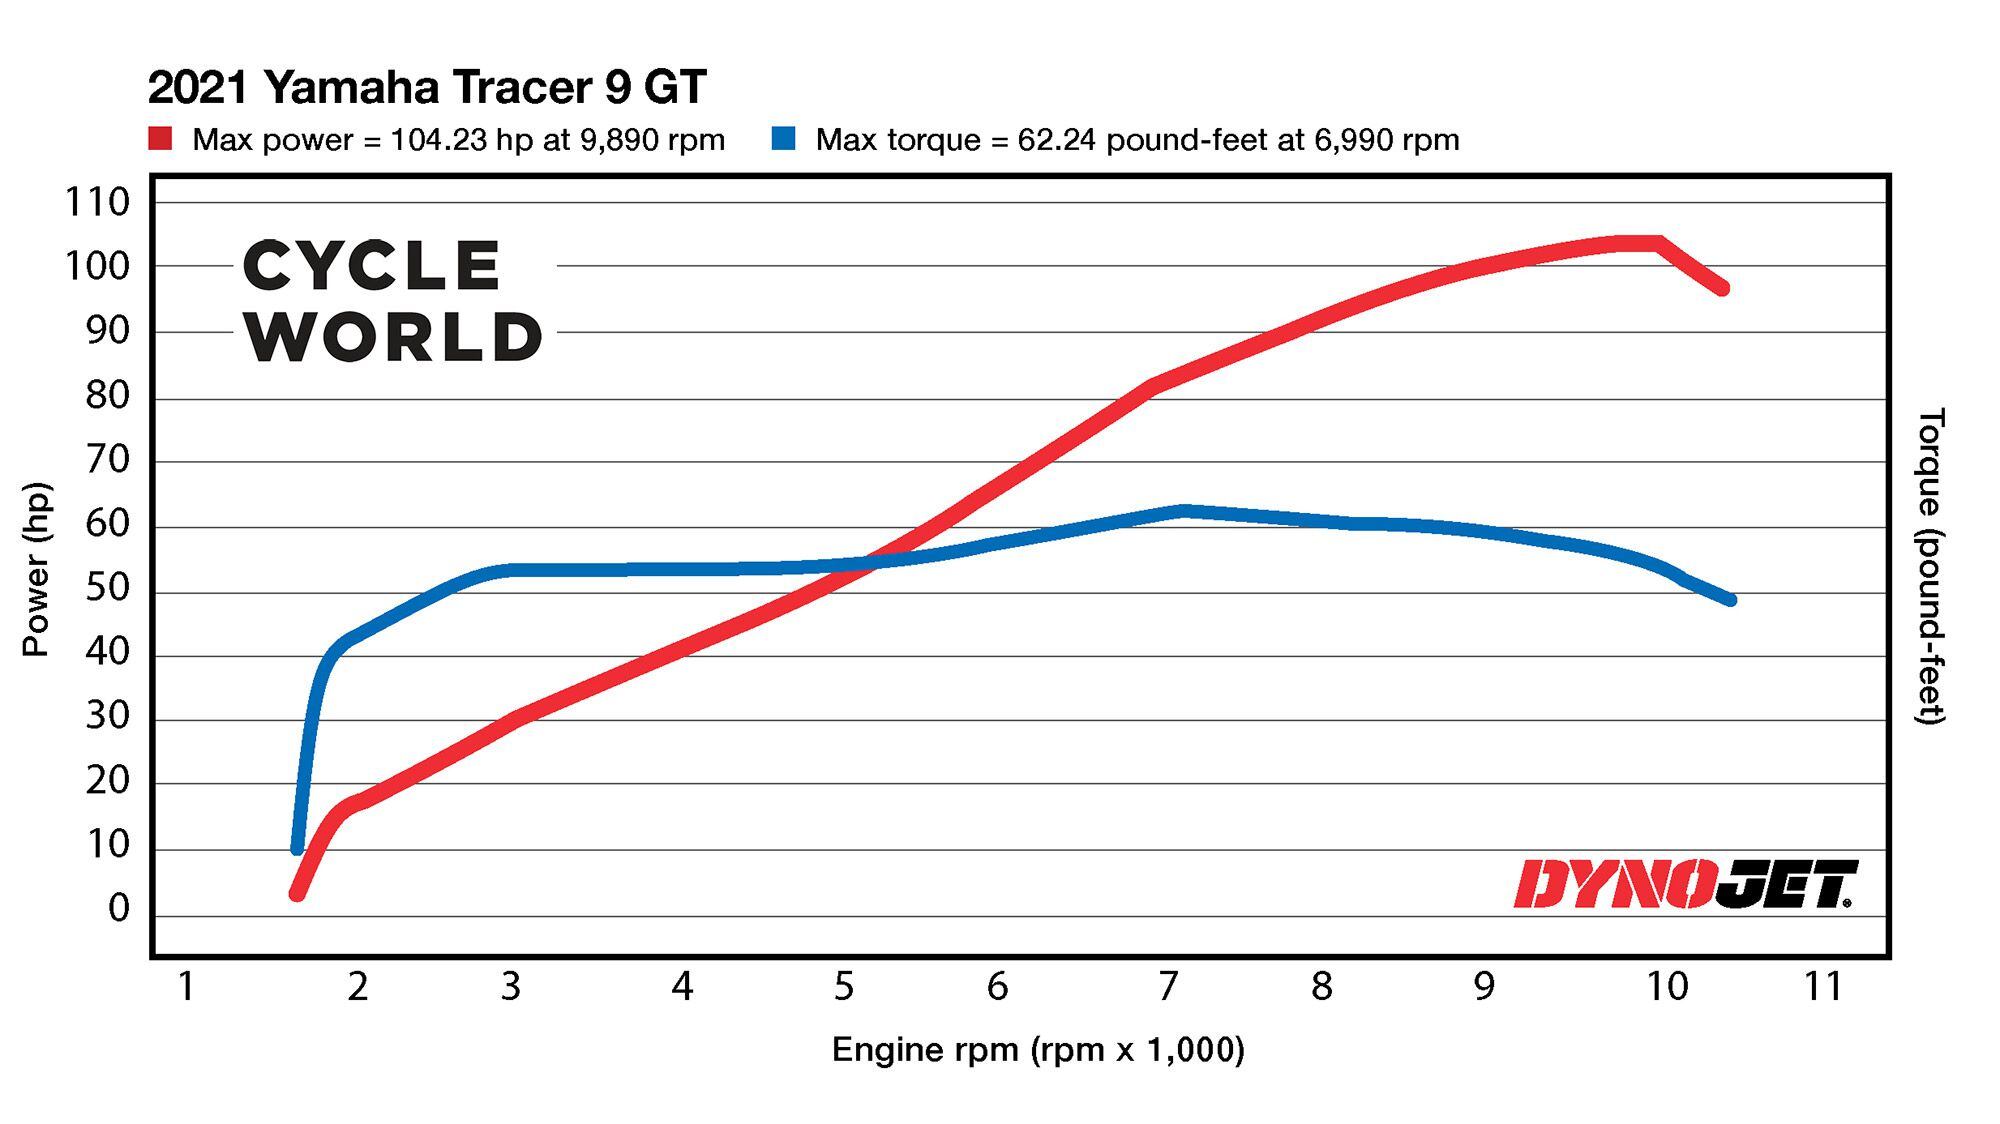 Horsepower and torque figures on the 2021 Yamaha Tracer 9 GT.